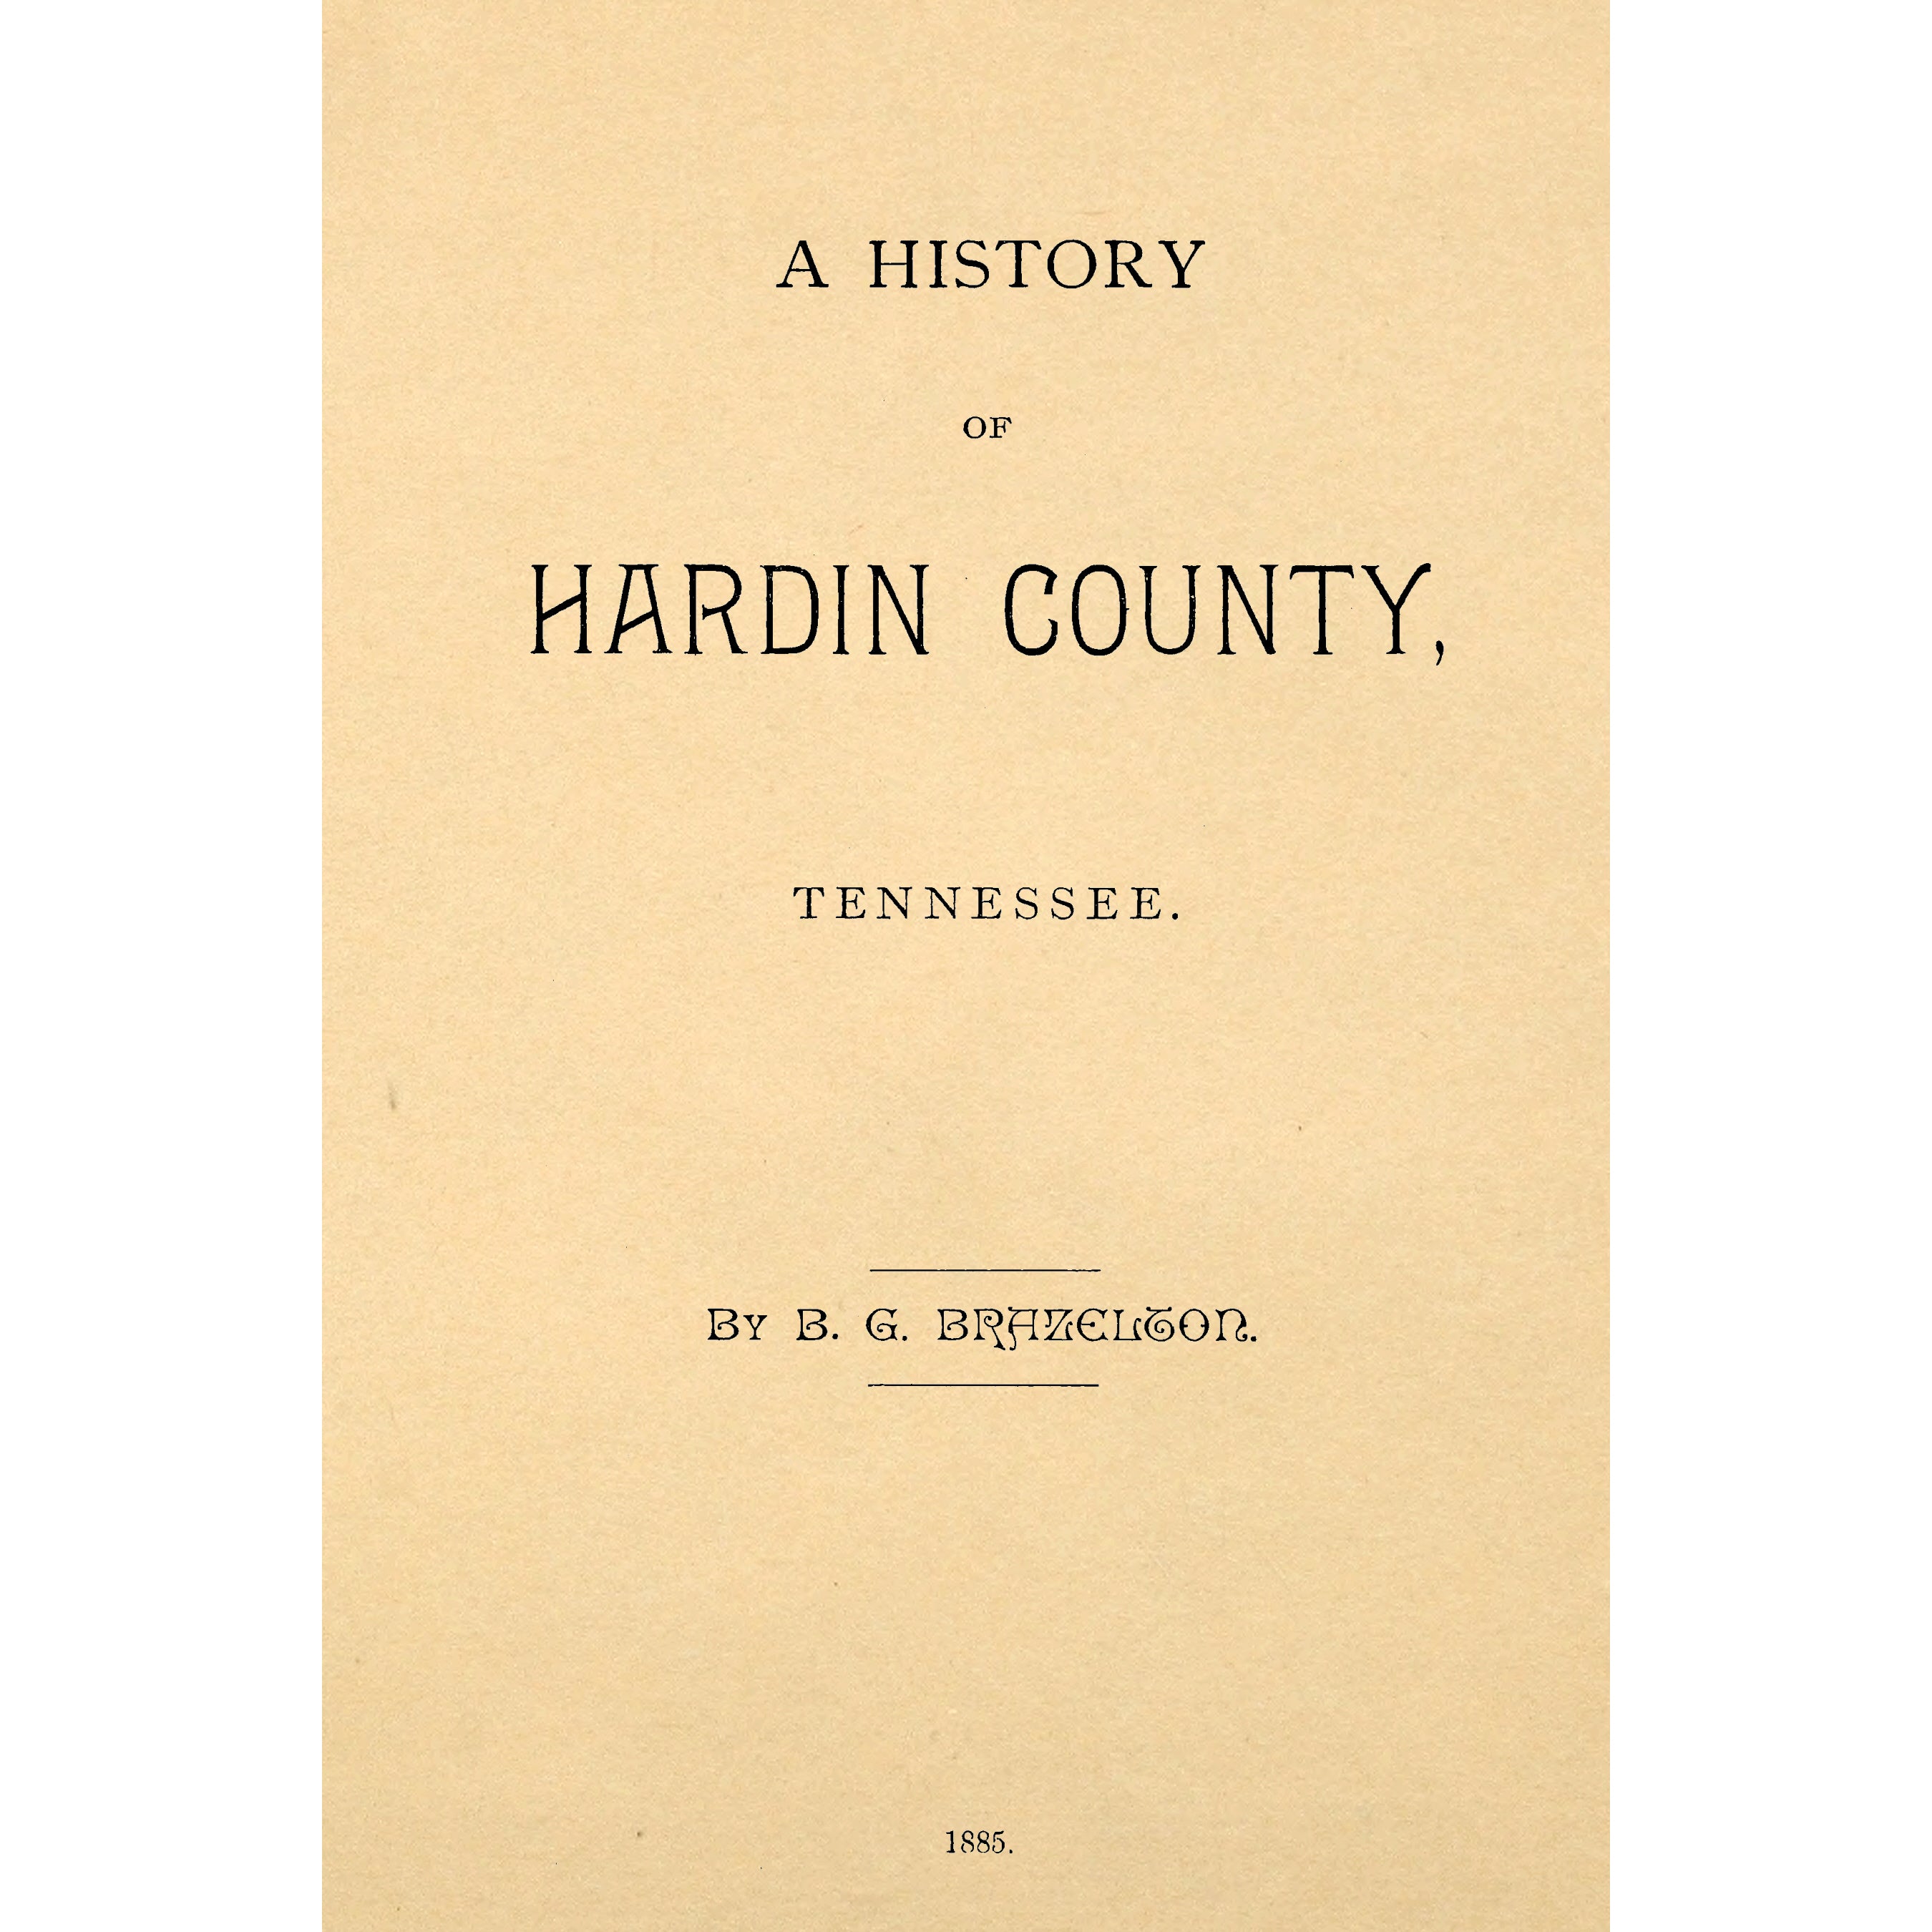 A history of Hardin County, Tennessee